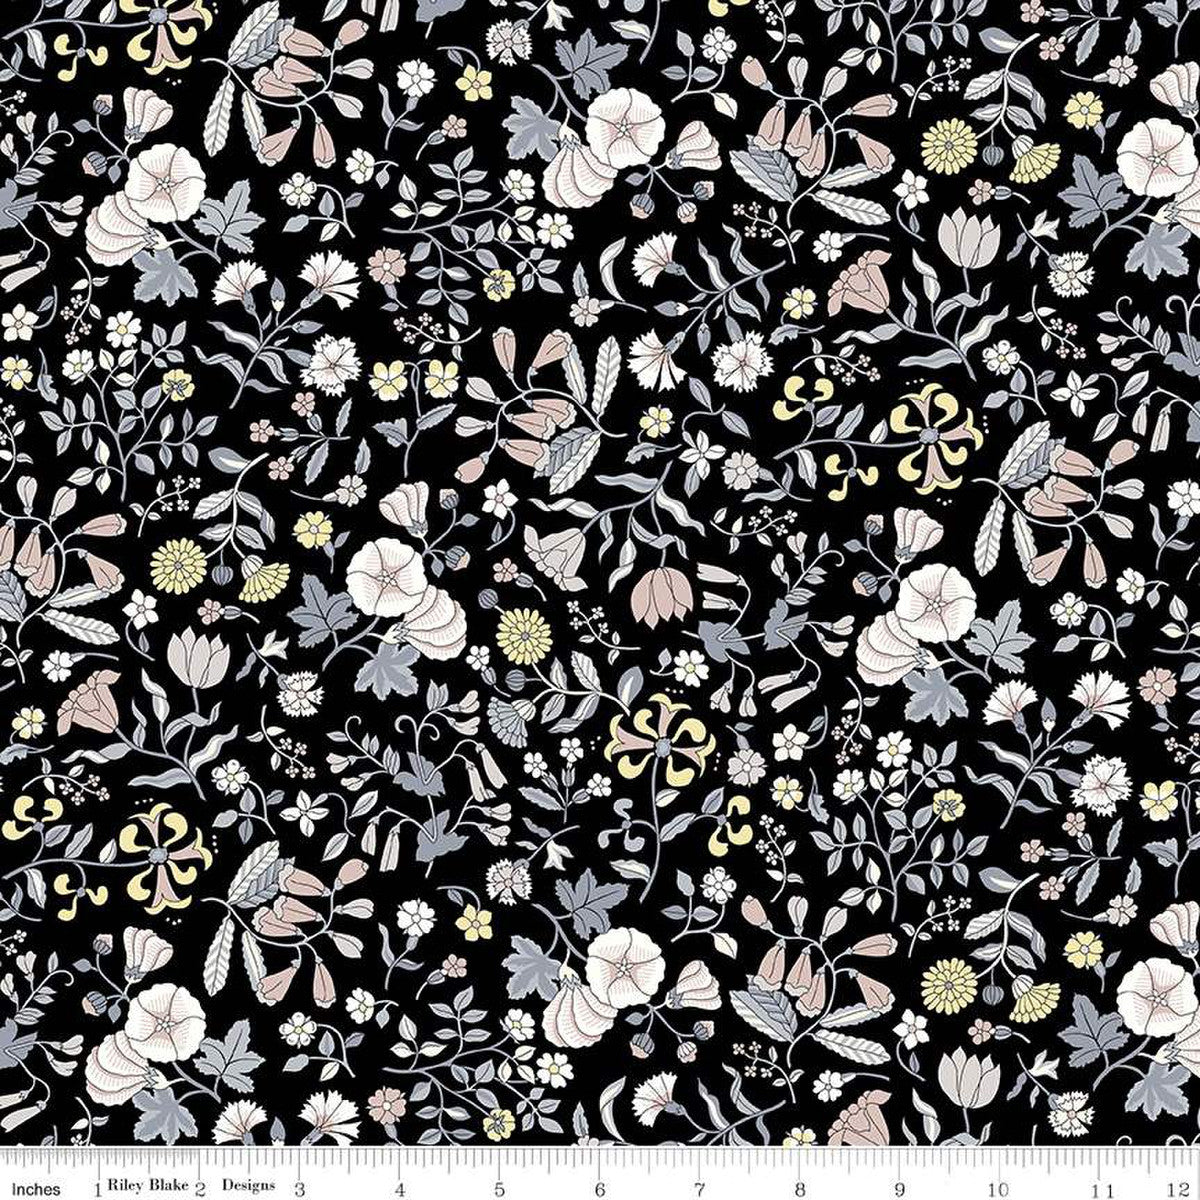 Flower Show Pebble Wildflower Field A Fabric - By the yard